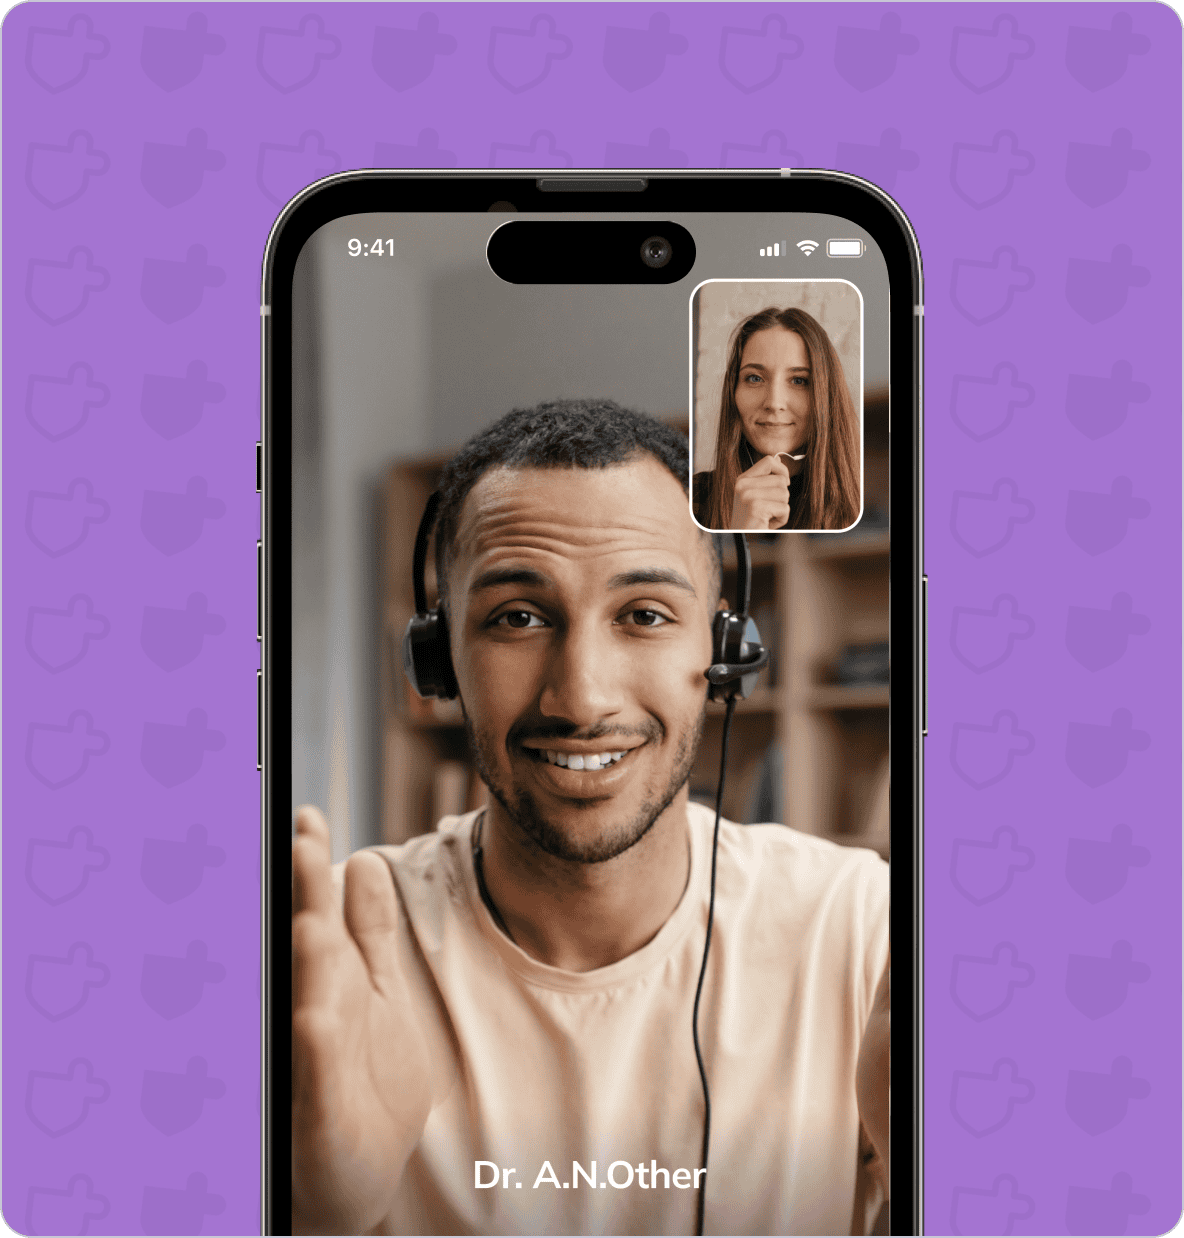 A person with headphones is having a video call with another person displayed in a smaller inset image. The phone screen displays "Dr. A.N.Other." The background is purple with a pattern.